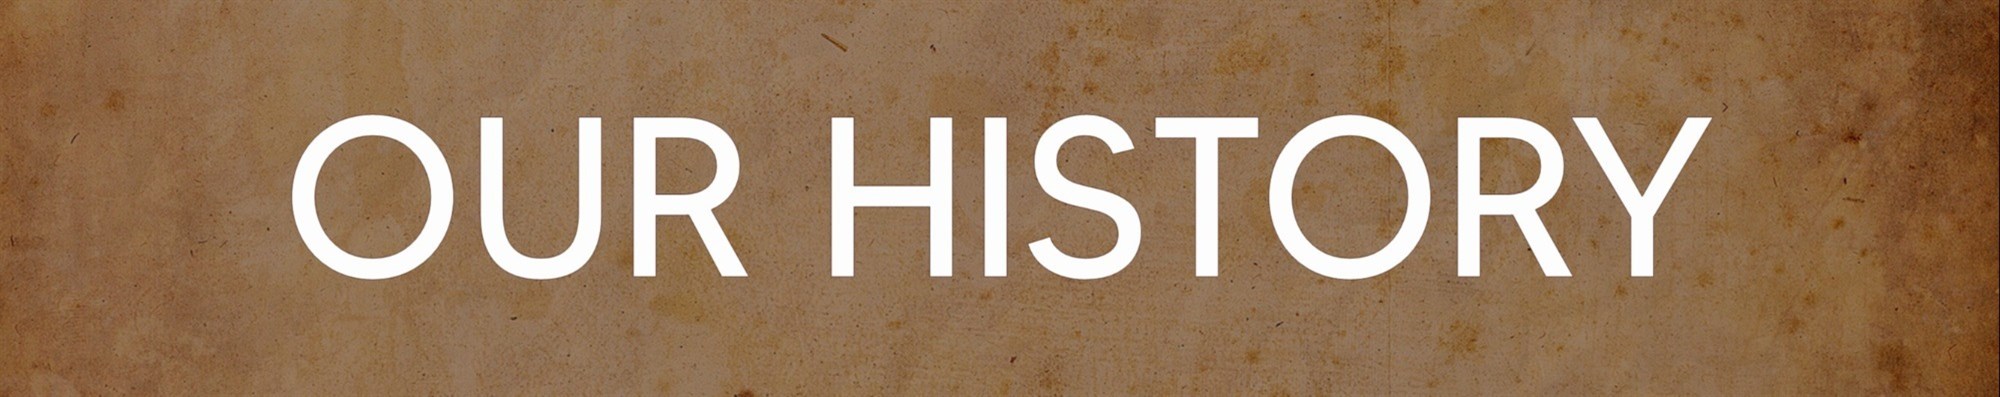 Our History Page Banner